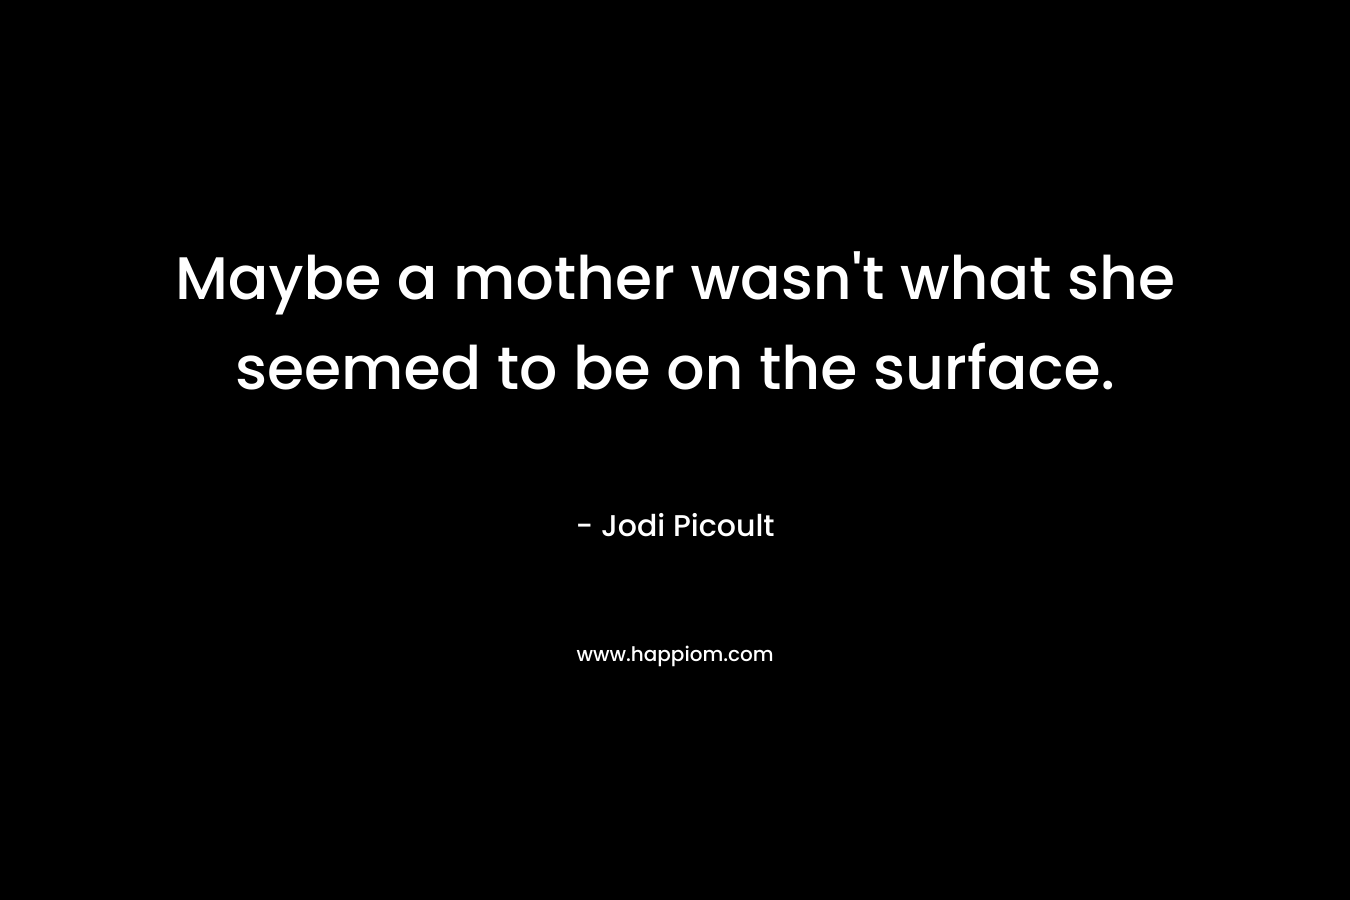 Maybe a mother wasn’t what she seemed to be on the surface. – Jodi Picoult